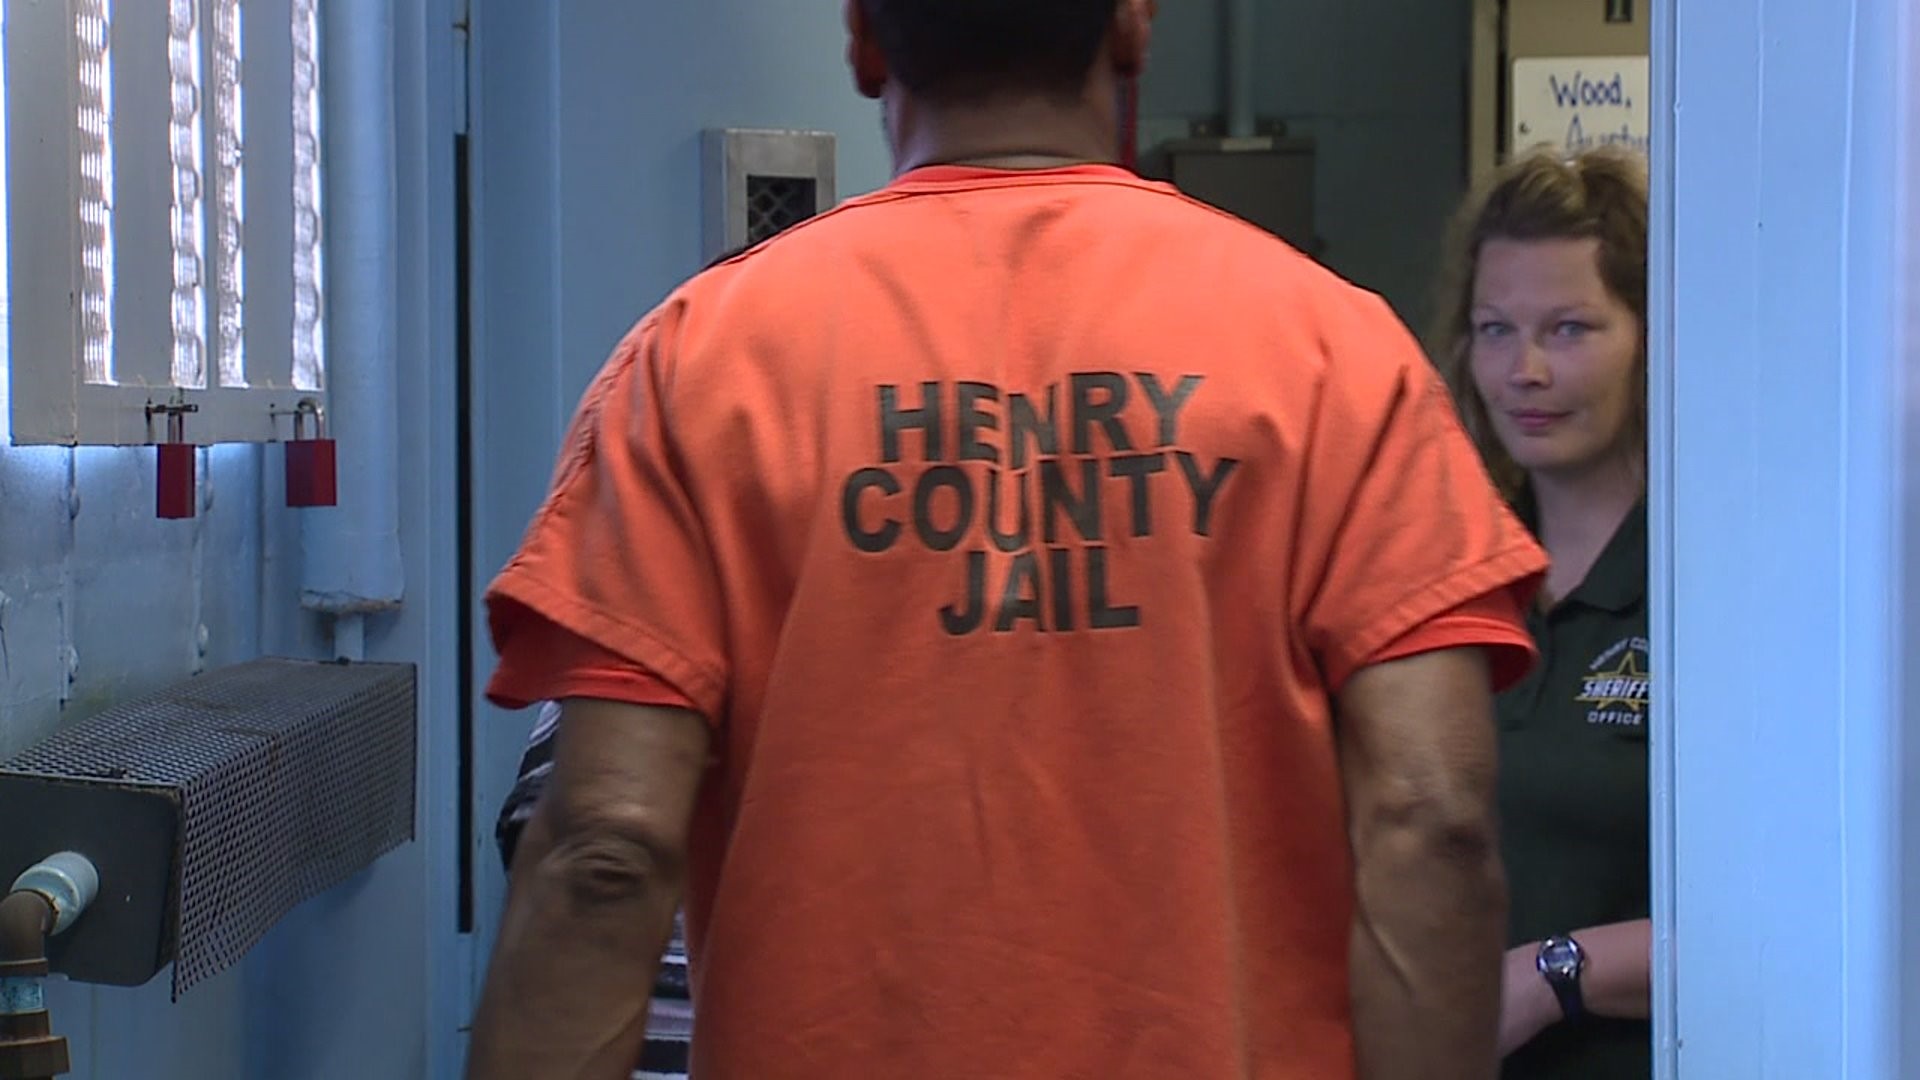 HENRY COUNTY JAIL DIVERSION